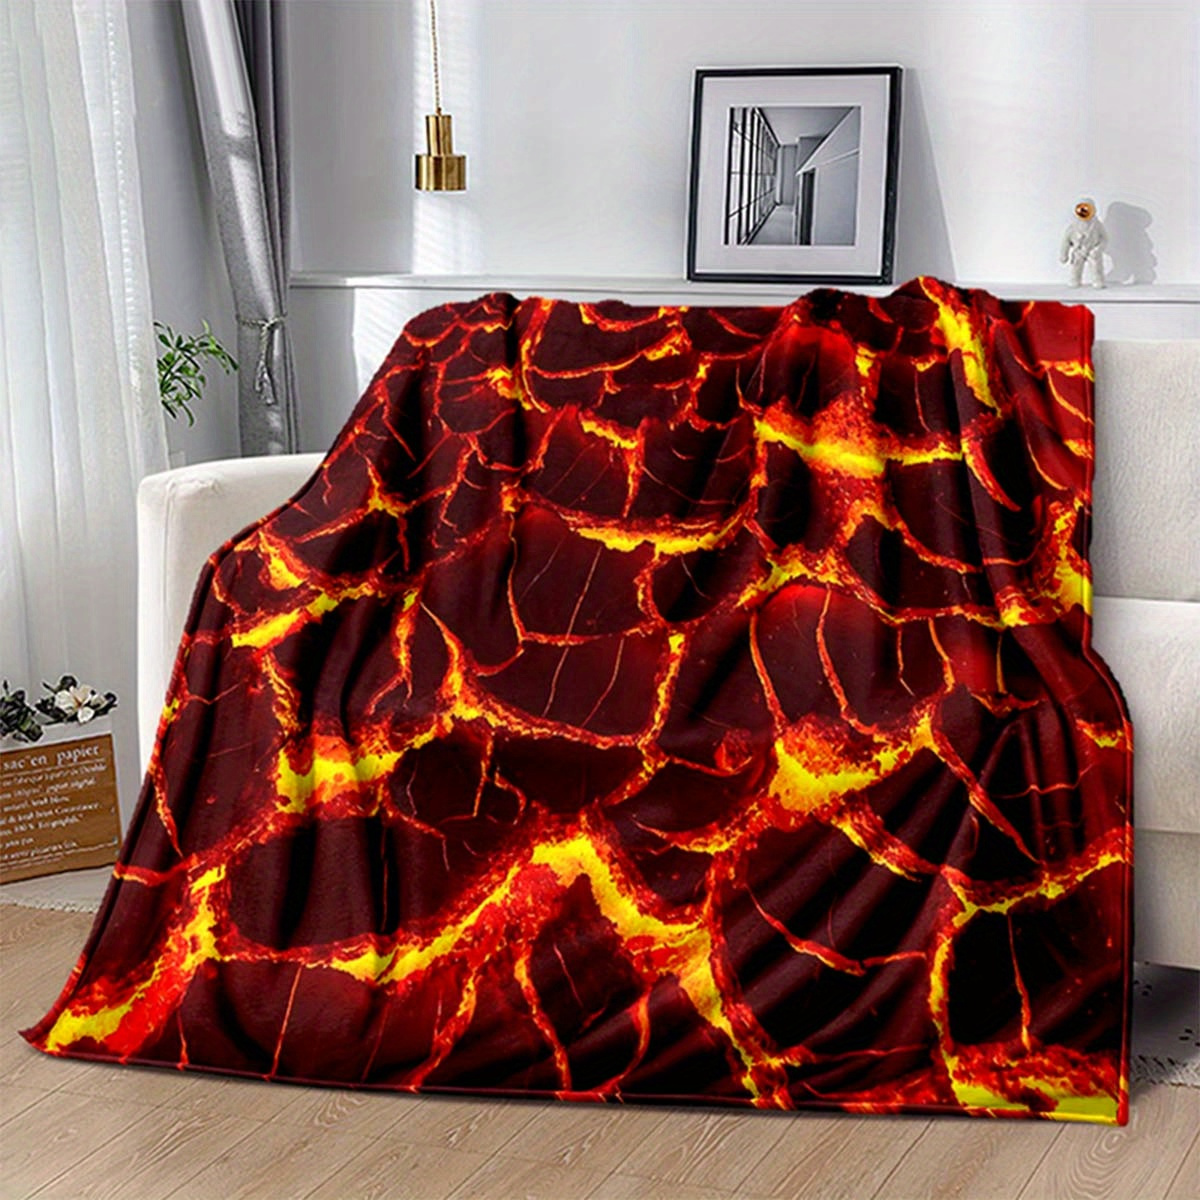 

3d Volcanic Lava Flame Design Flannel Throw Blanket, Soft Polyester Couch Chair Cover For Living Room Bedroom Sofa Picnic Decor, Large Warm Cozy Blanket With Vivid Colors For Napping And Car Use